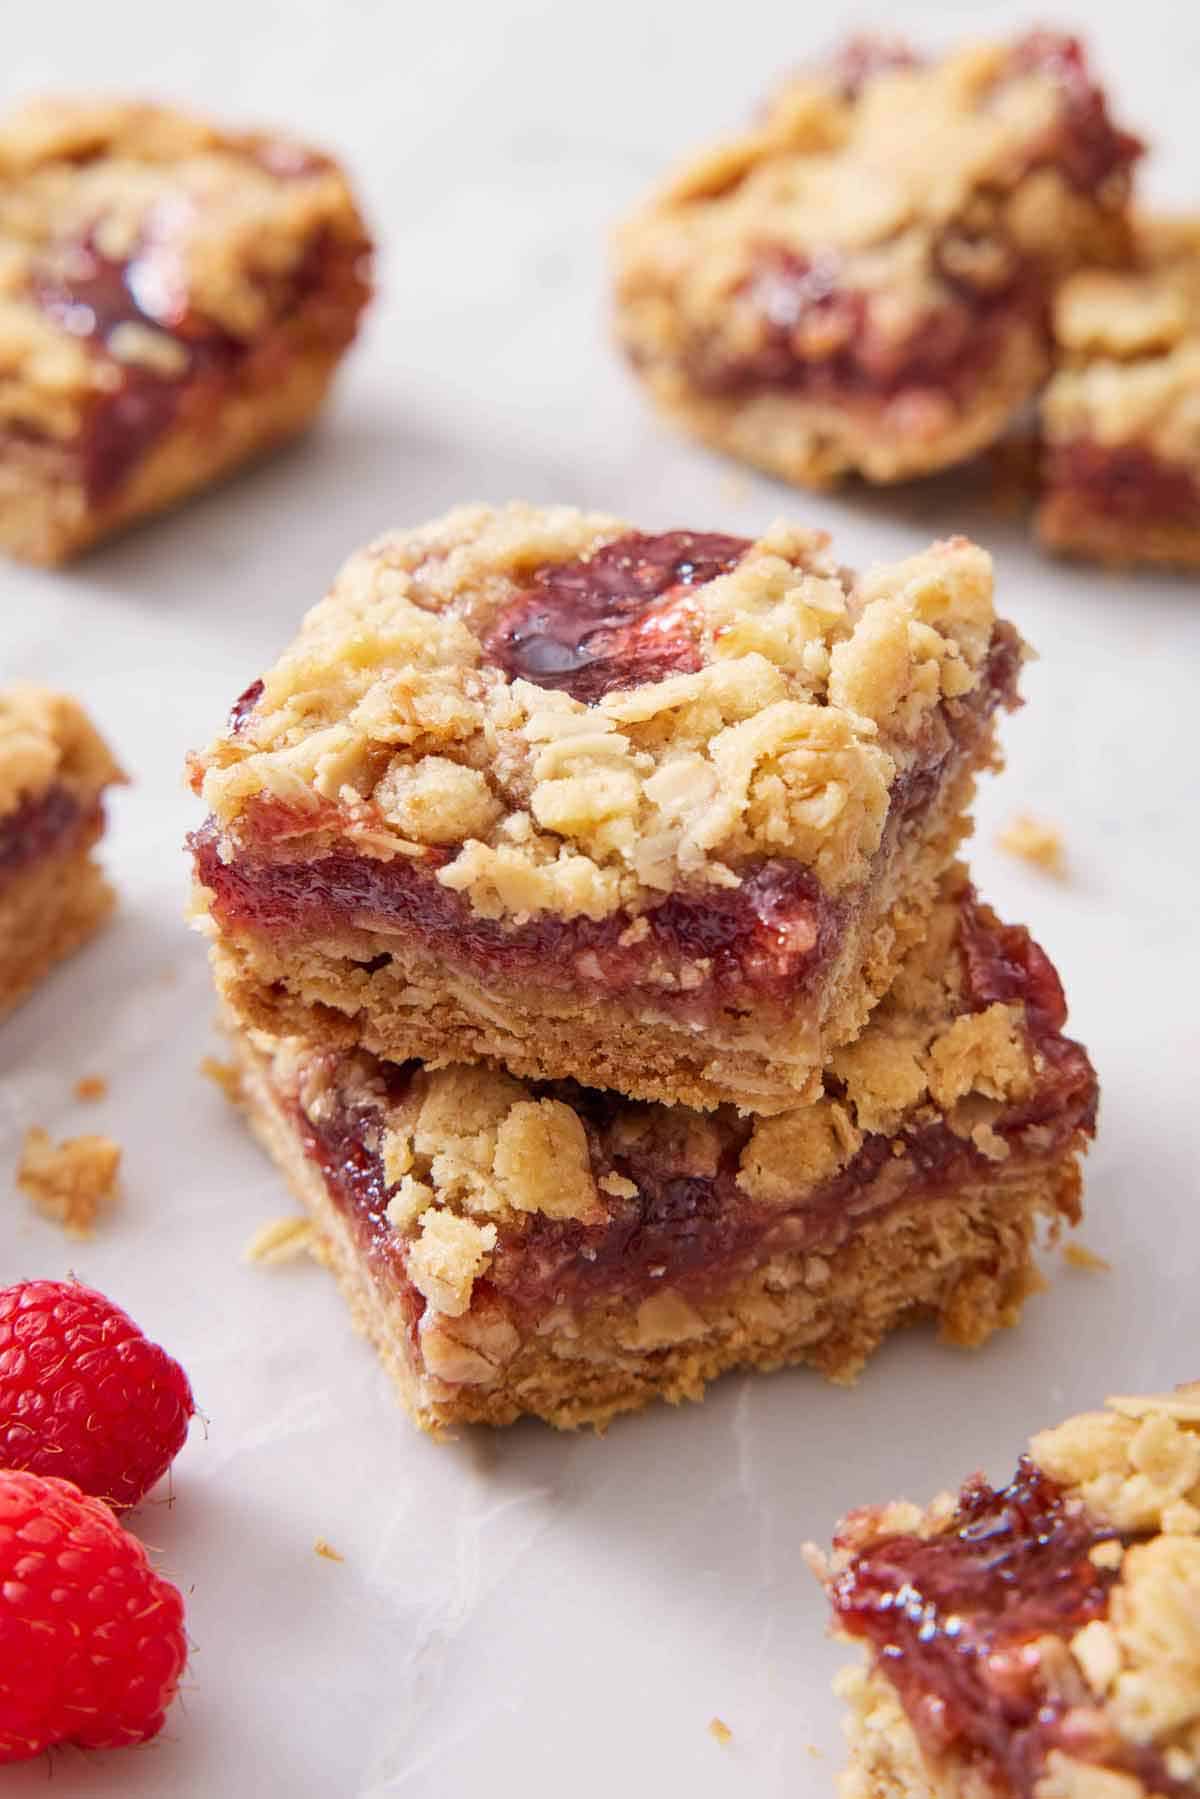 Two raspberry bars stacked on top of each other with more bars on scattered around.